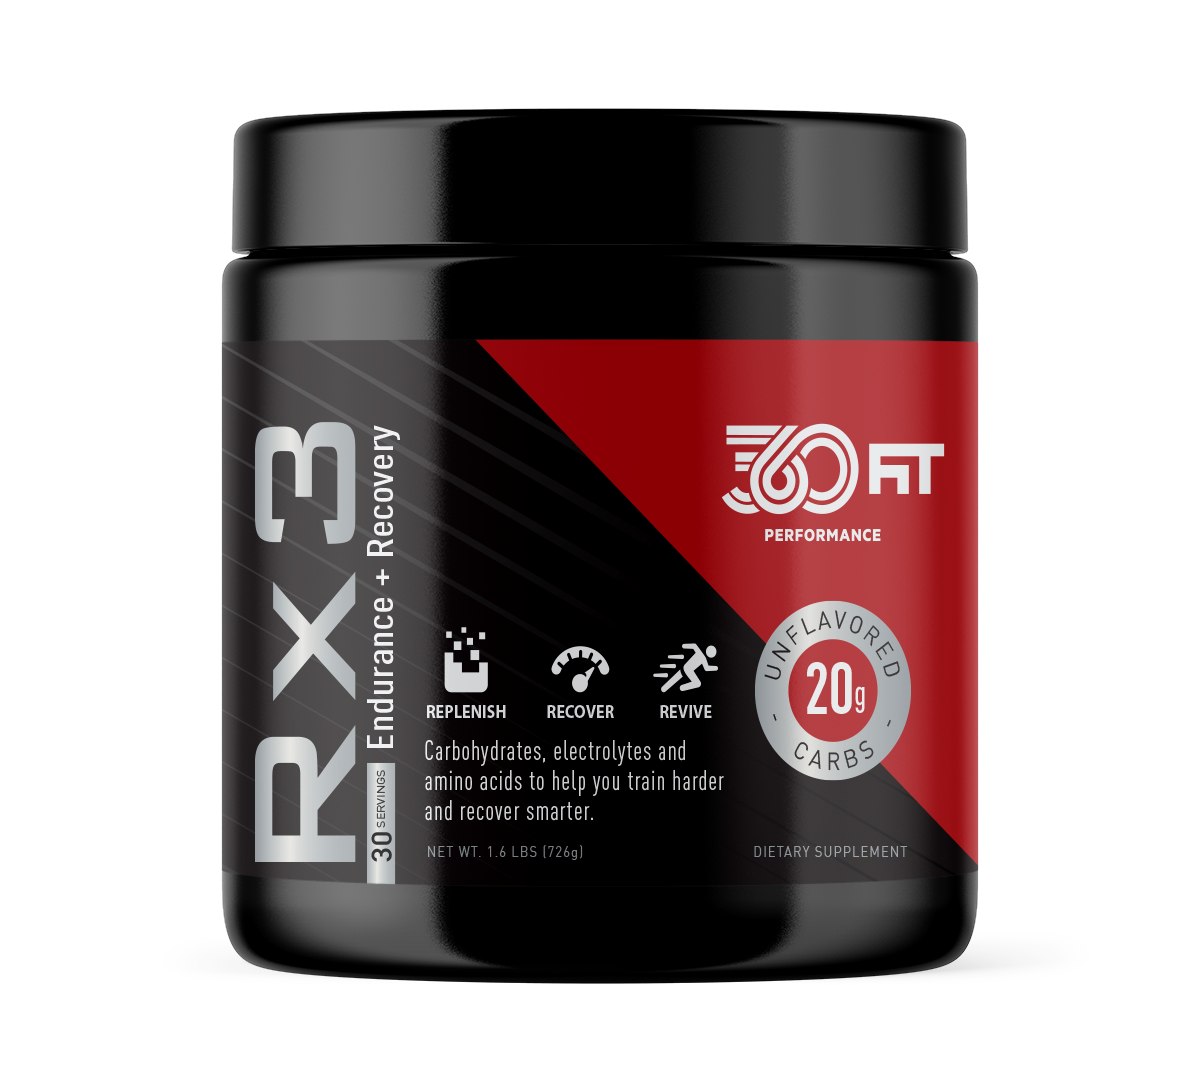 Rx3 Endurance + Recovery